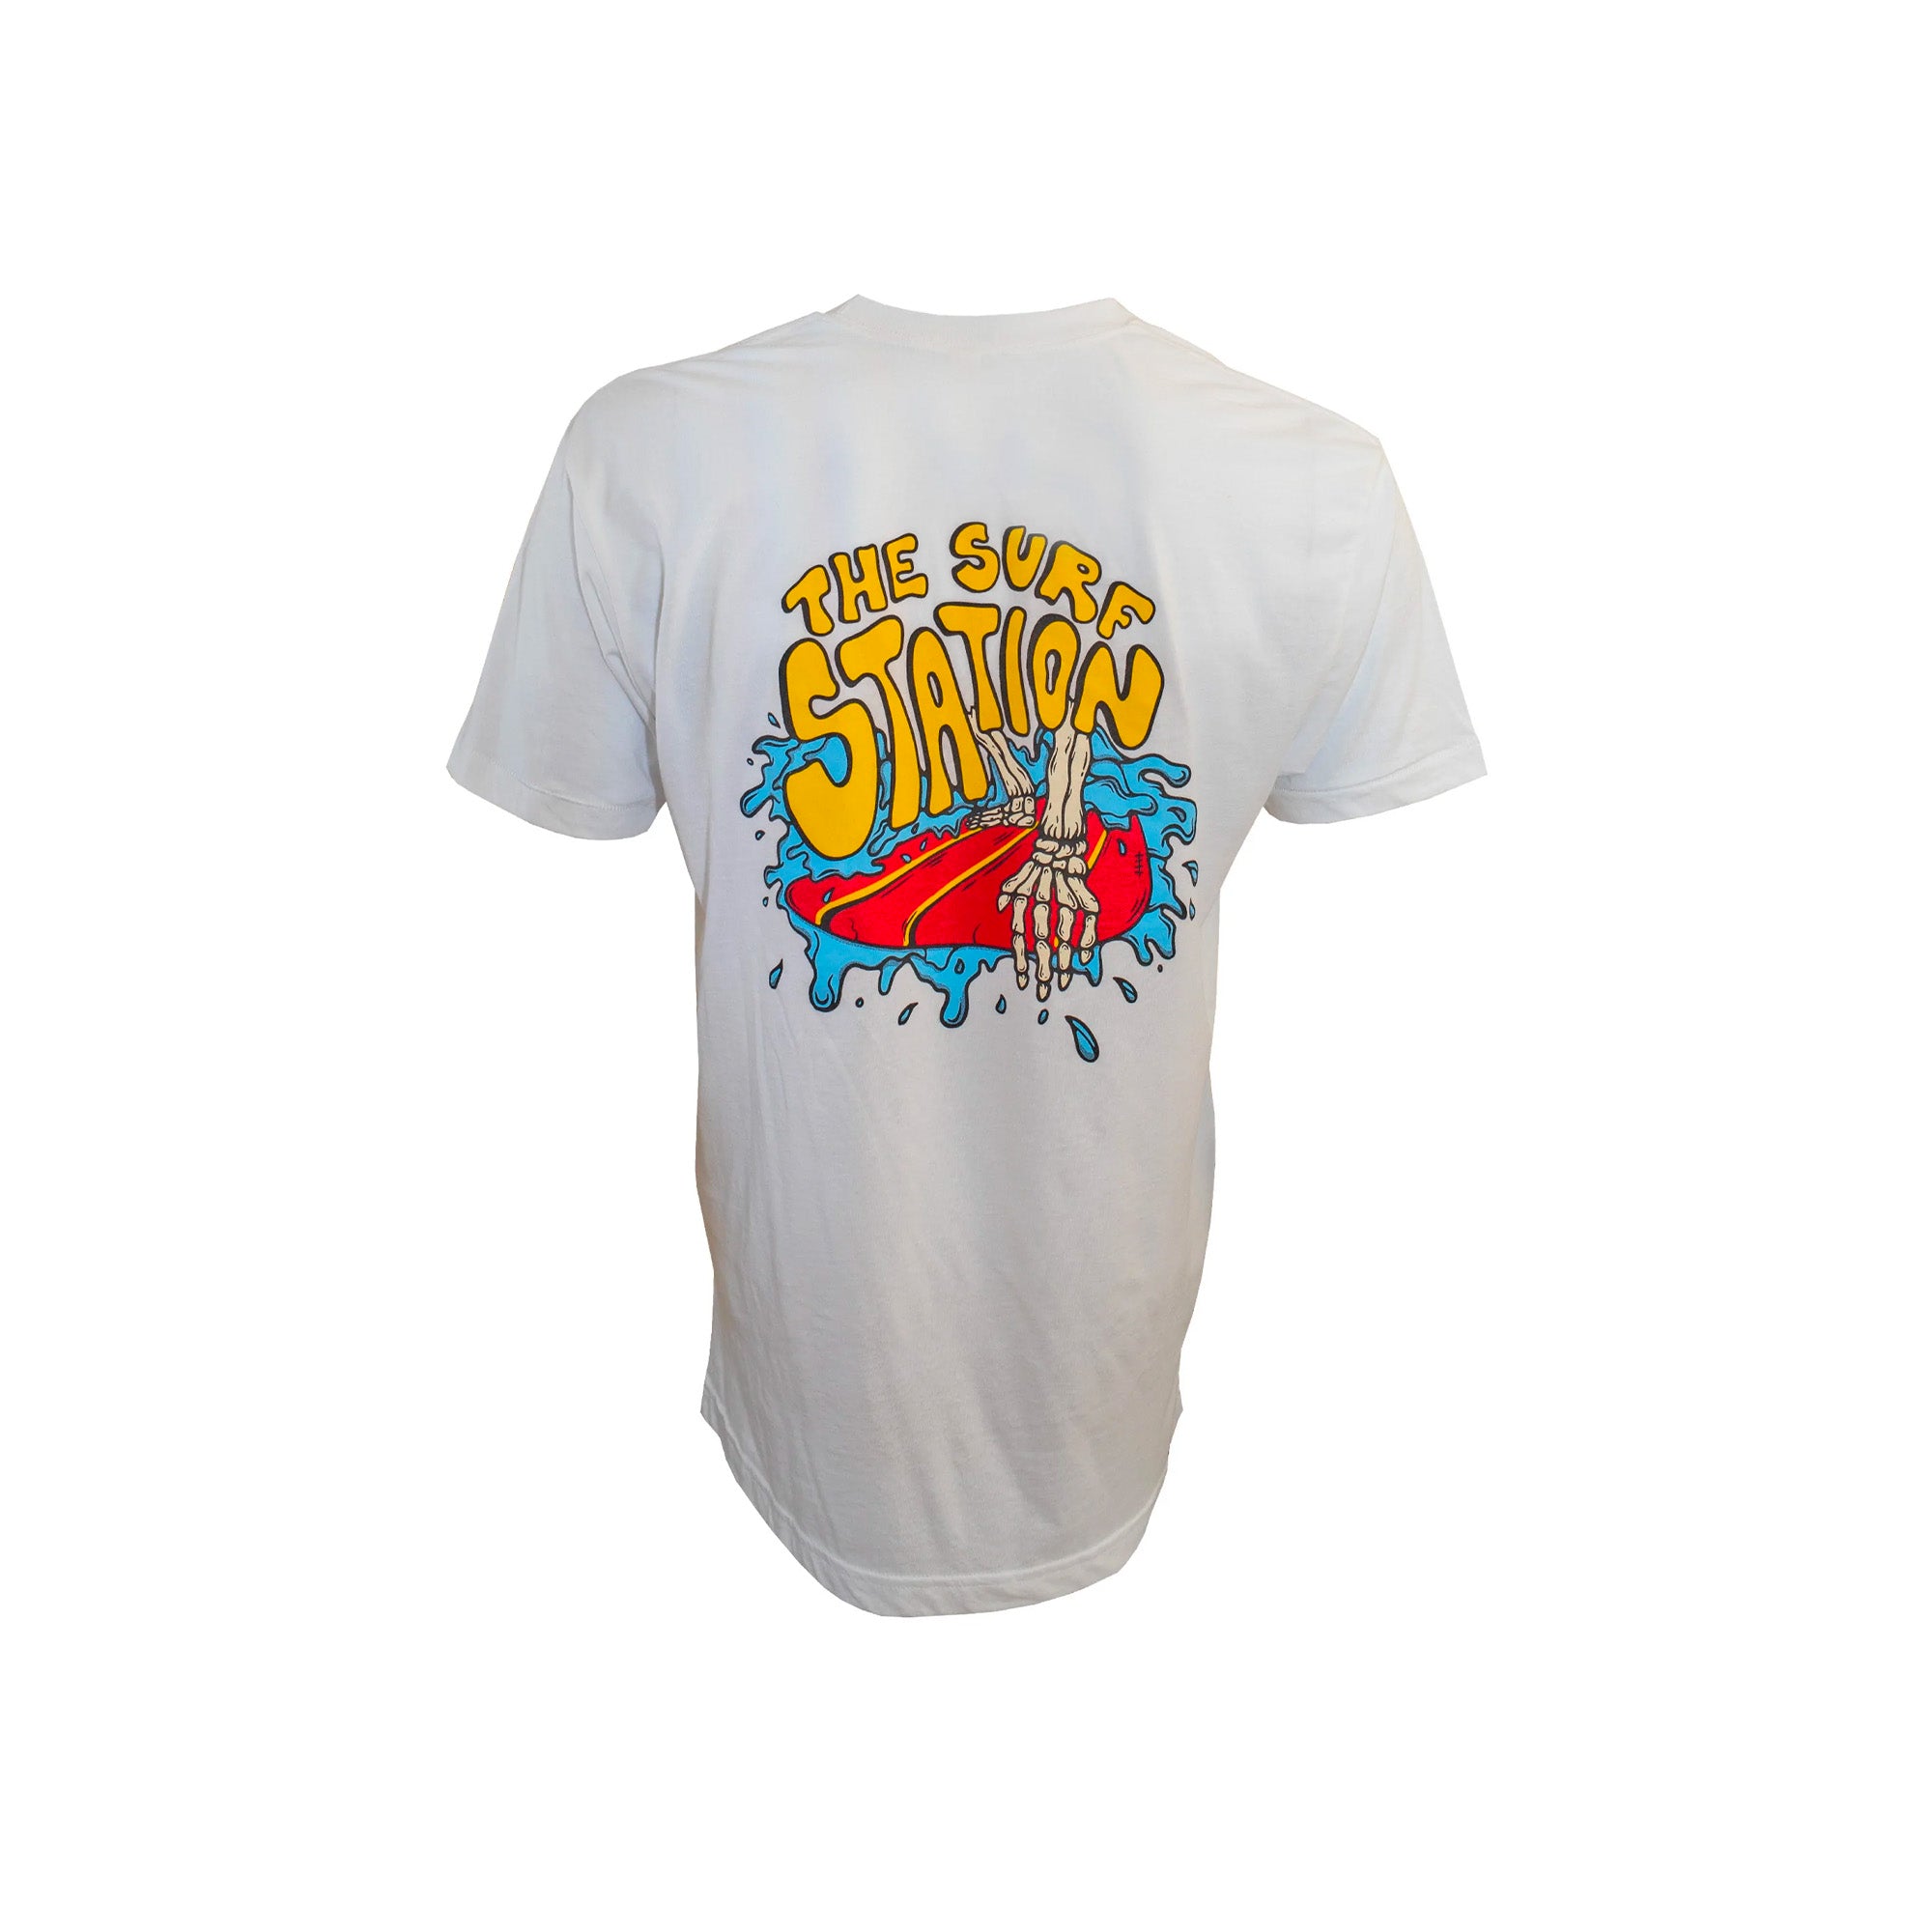 Surf Station x Chase Berenson Cheater 5 Youth Boy's S/S T-Shirt